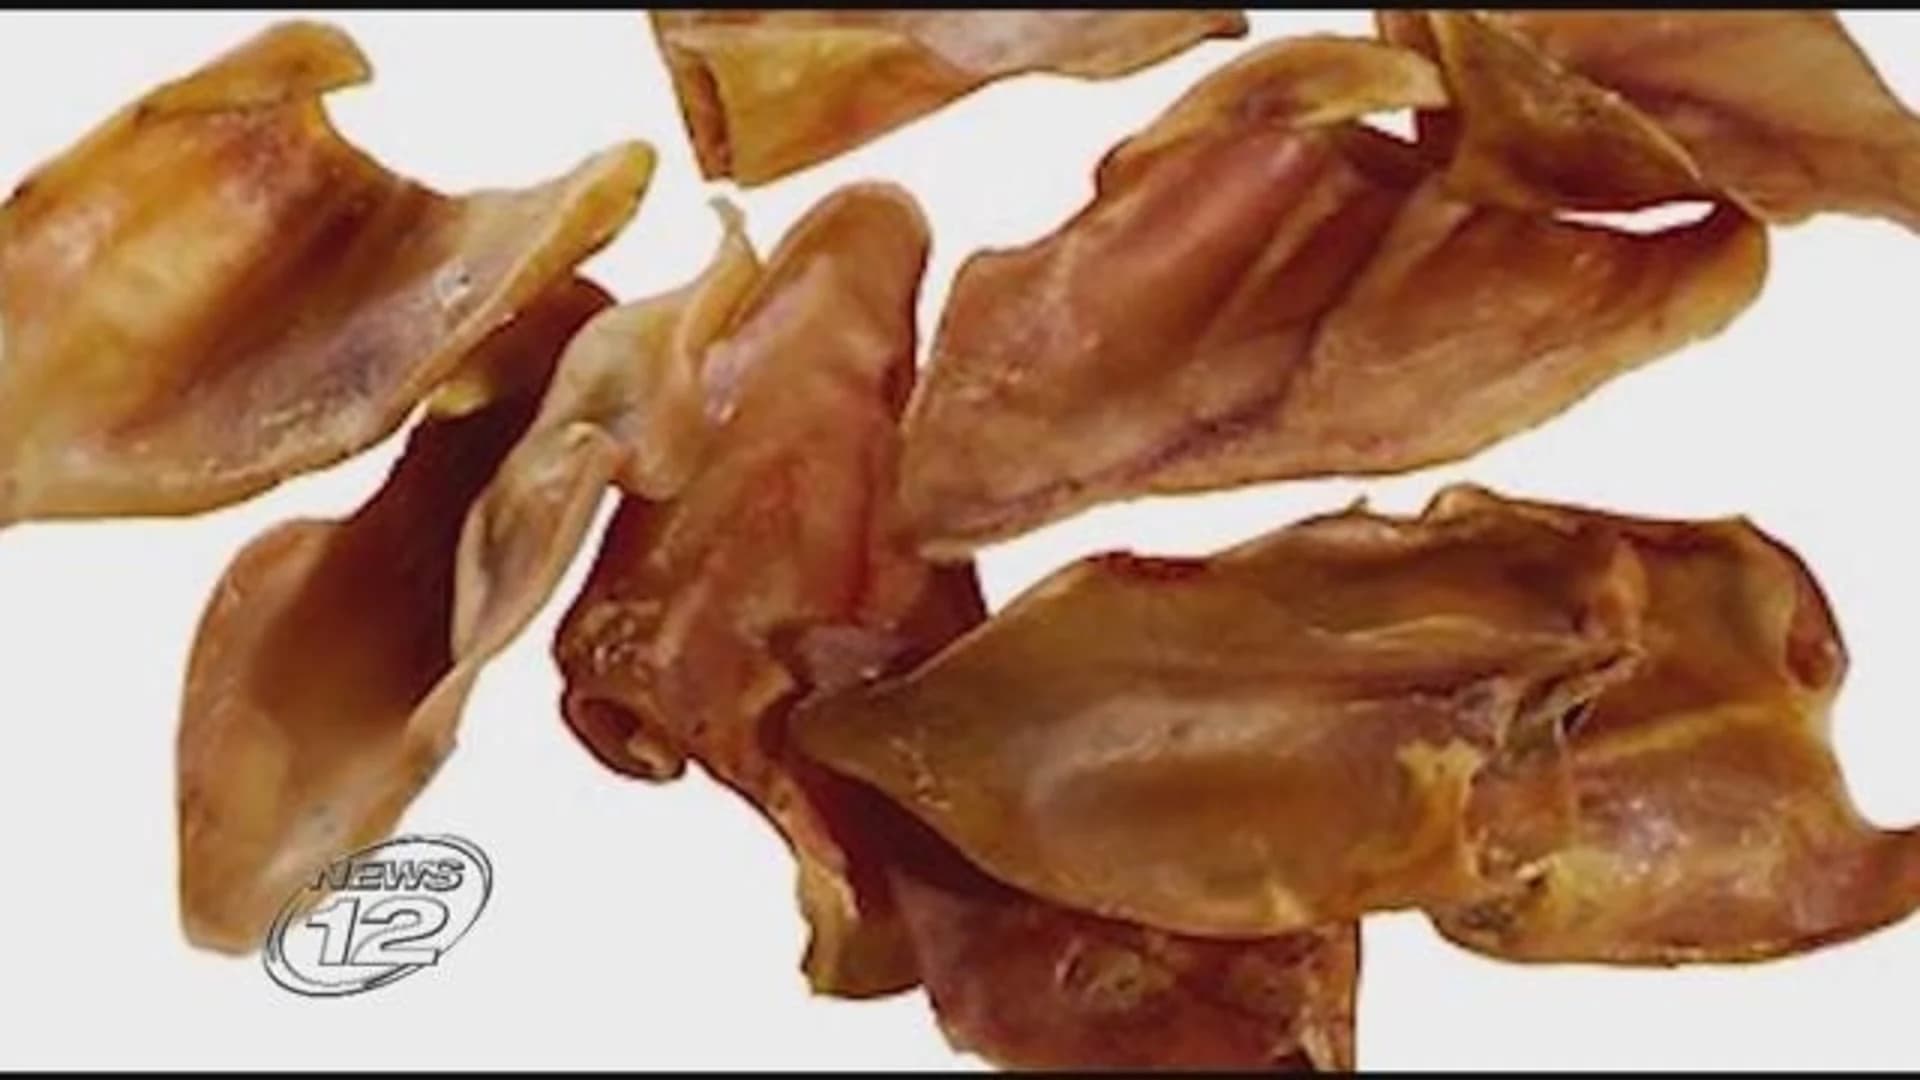 CDC issues warning about feeding pig ears to dogs